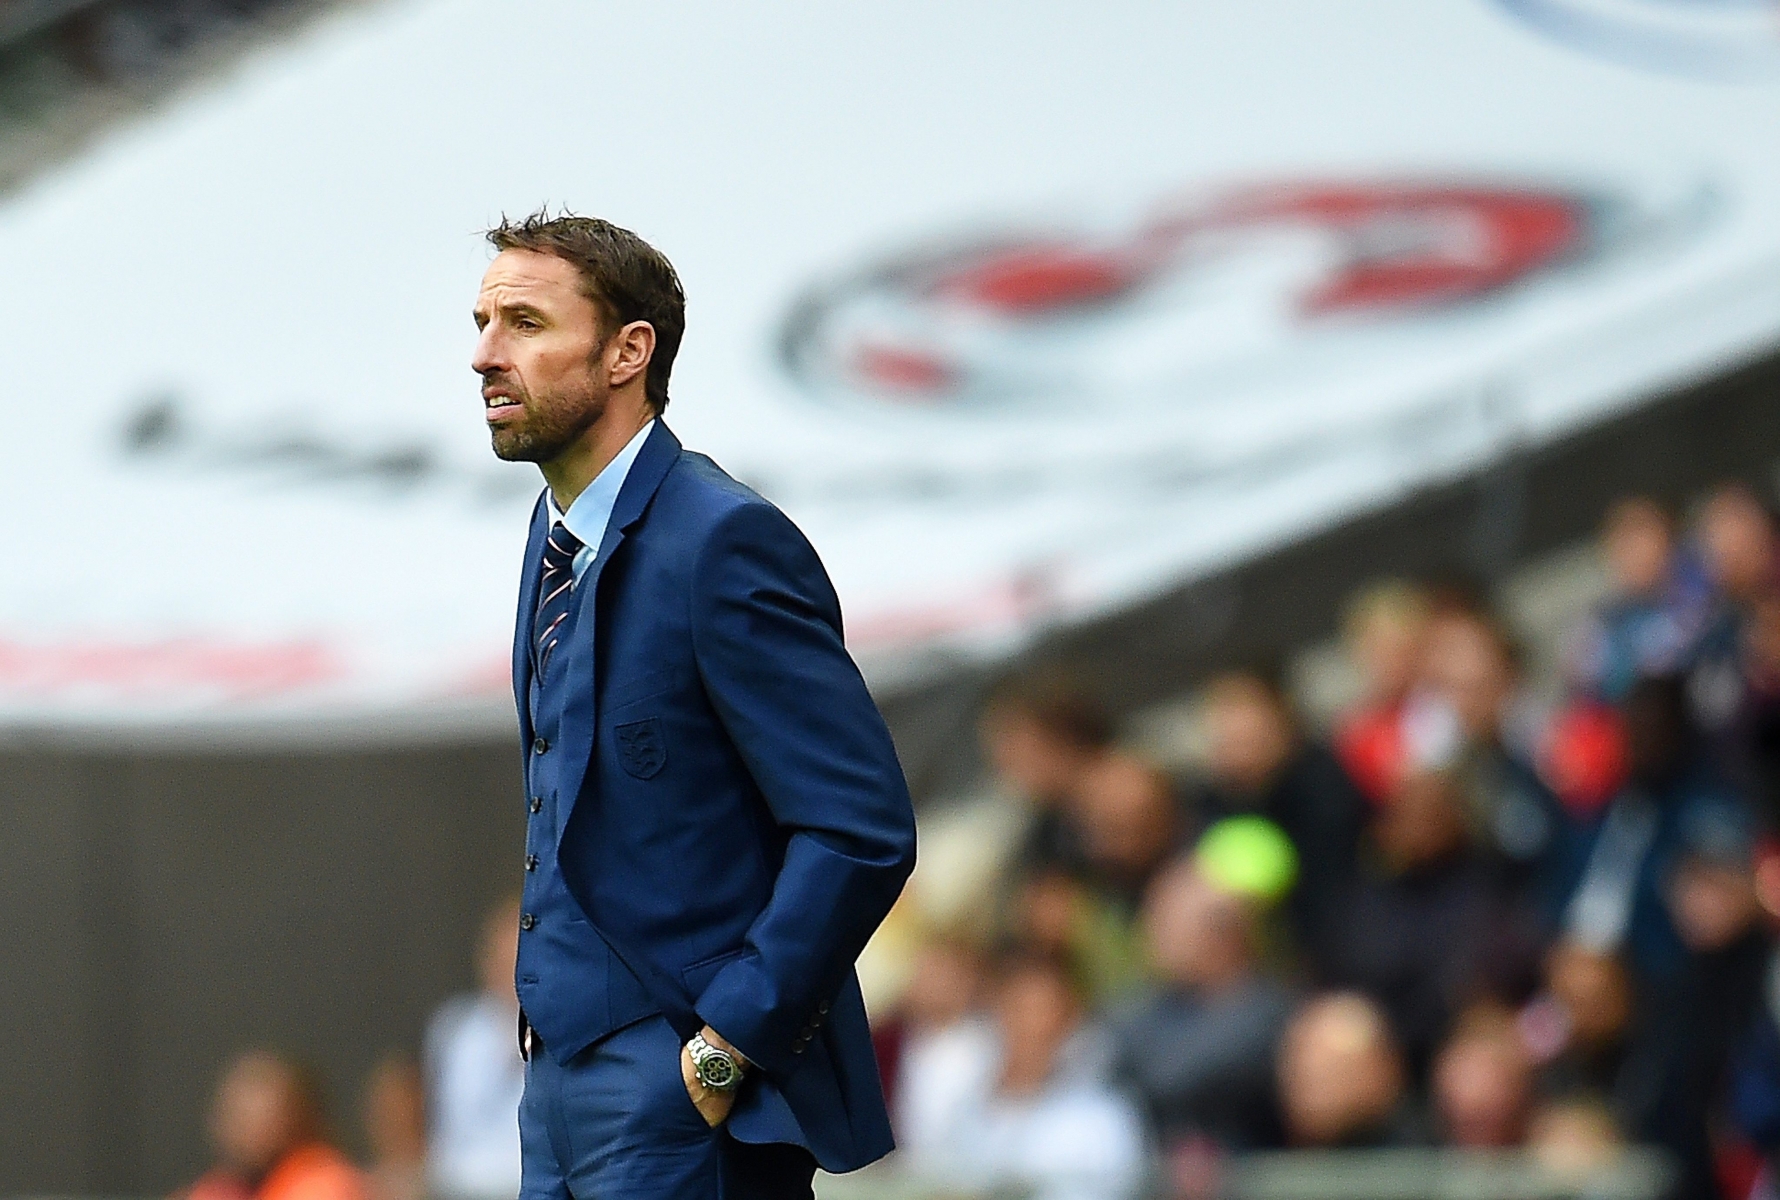 epa05576590 England's interim manager Gareth Southgate watches the FIFA World Cup 2018 qualifying soccer match between England and Malta at Wembley Stadium in London, Britain, 08 October 2016.  EPA/ANDY RAIN BRITAIN SOCCER FIFA WORLD CUP 2018 QUALIFICATION